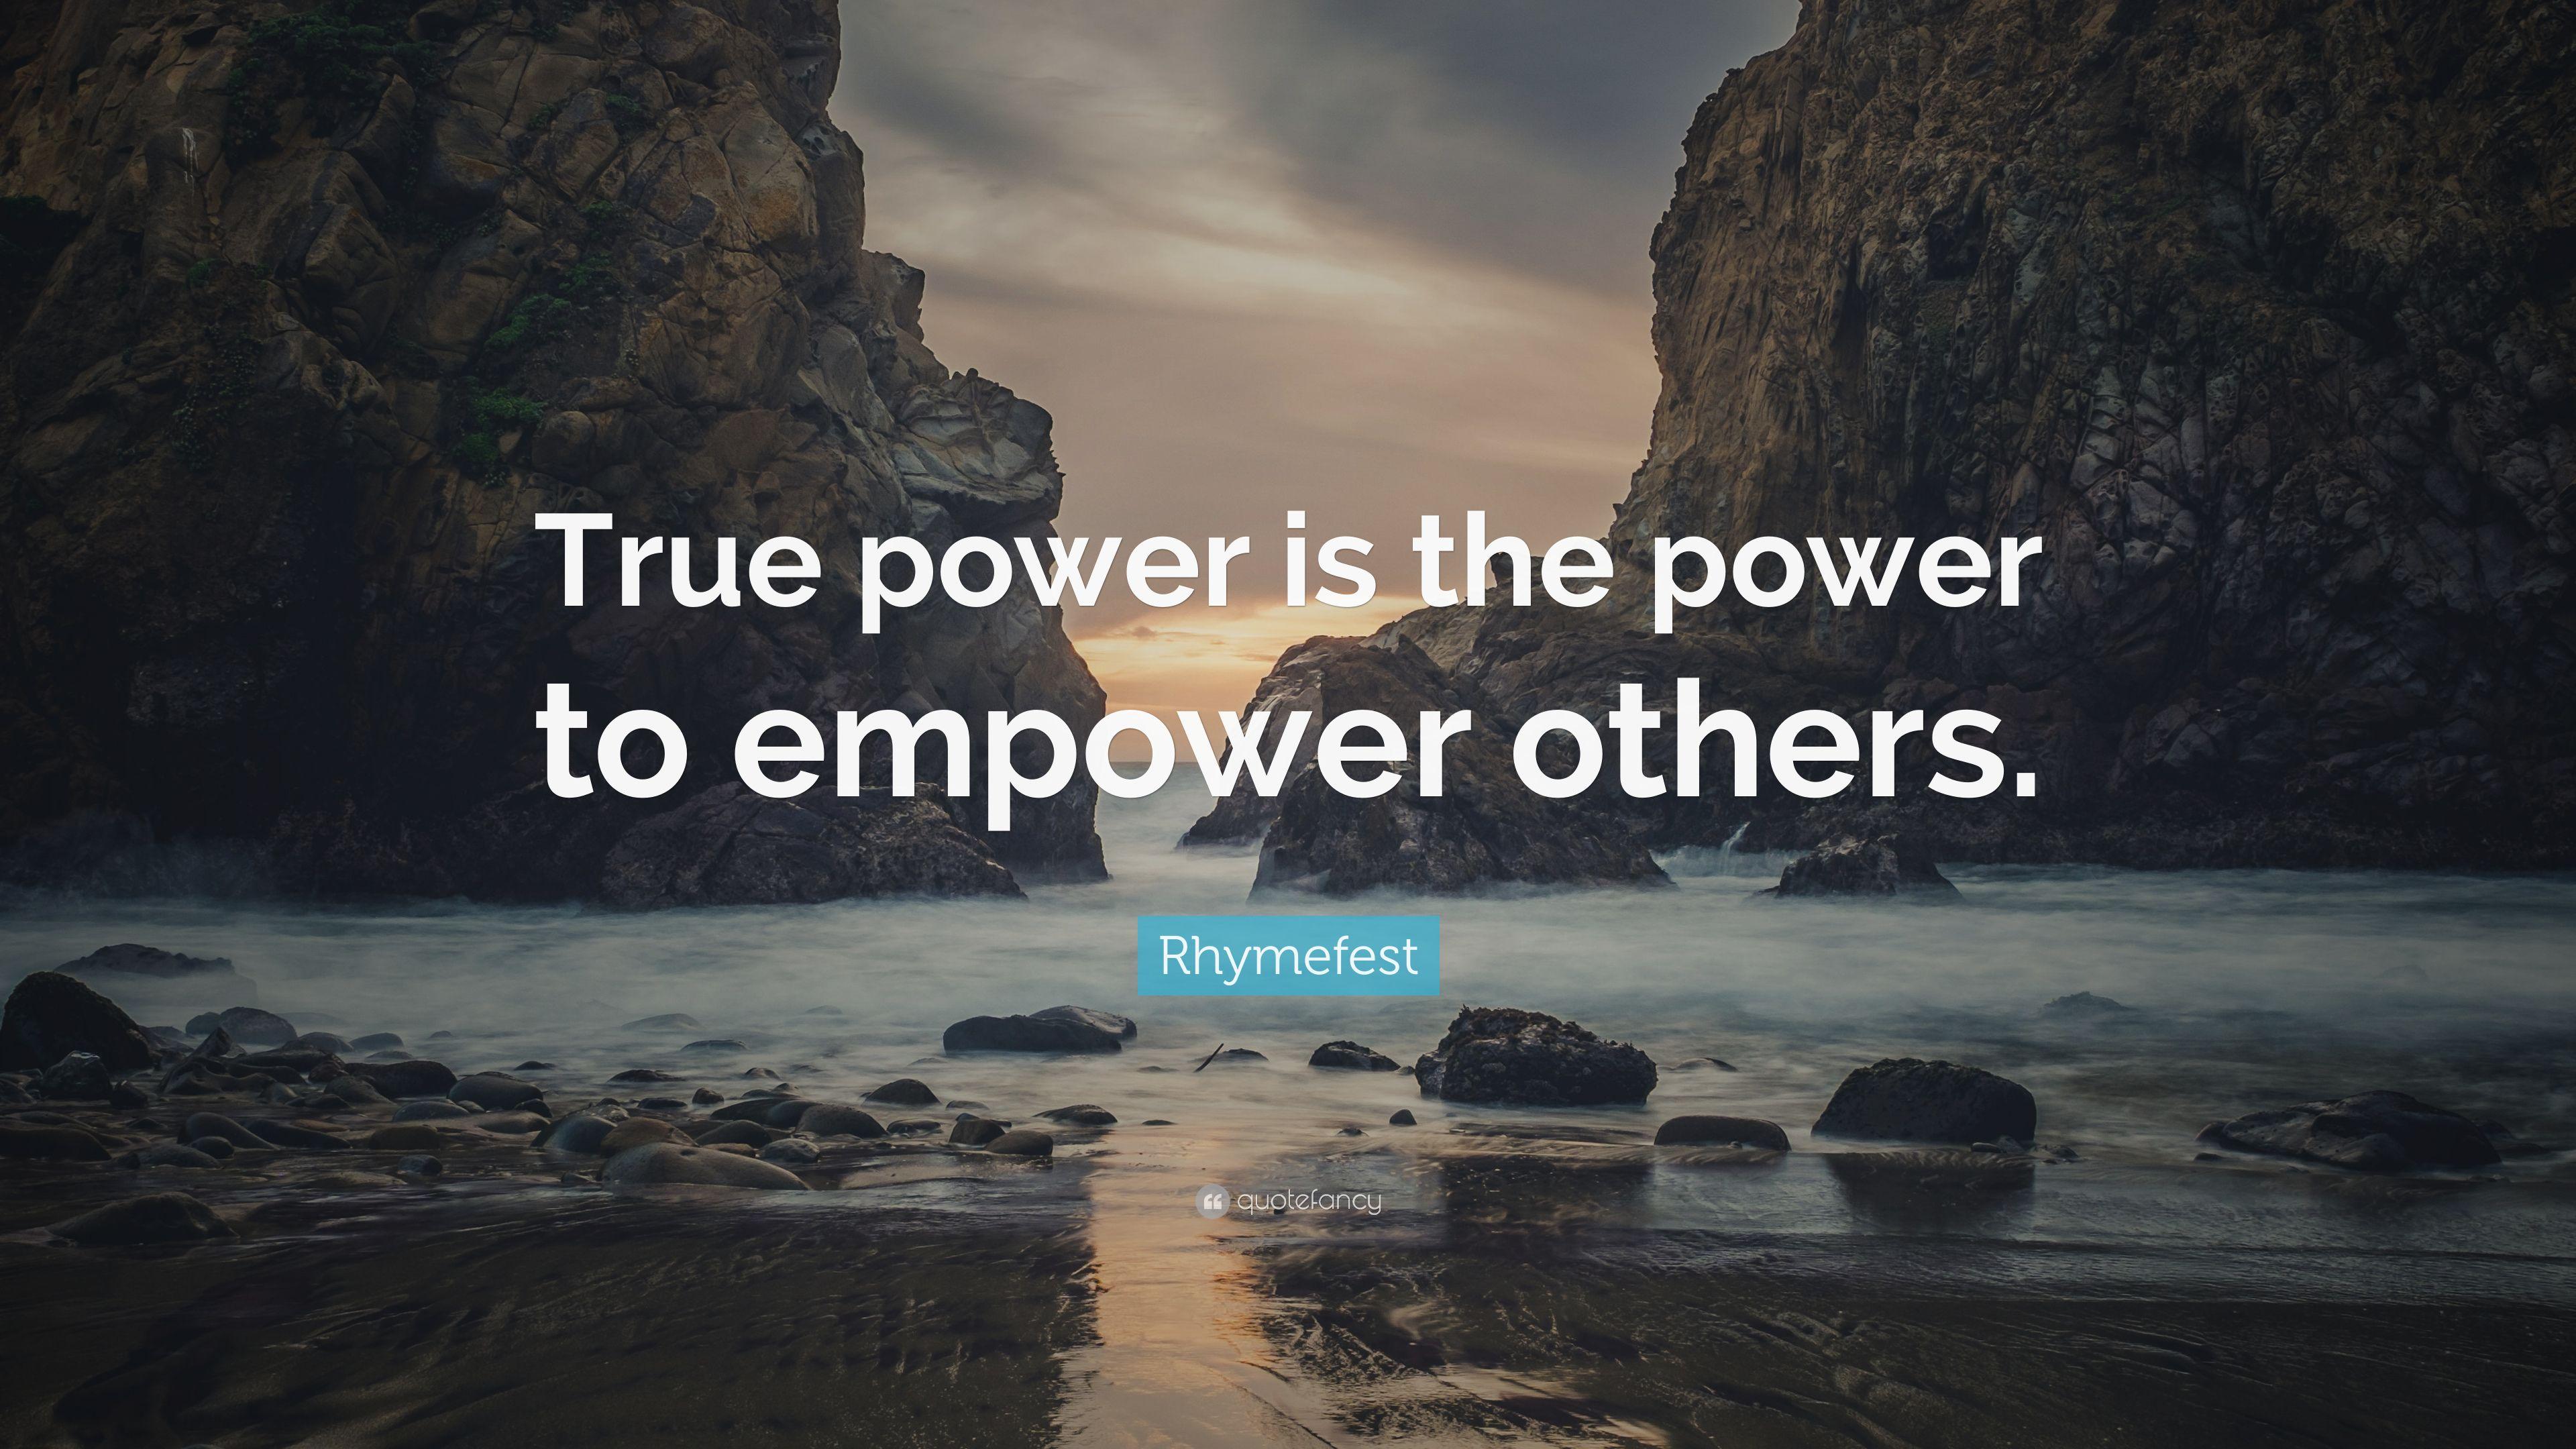 Rhymefest Quote: "True power is the power to empower others. 